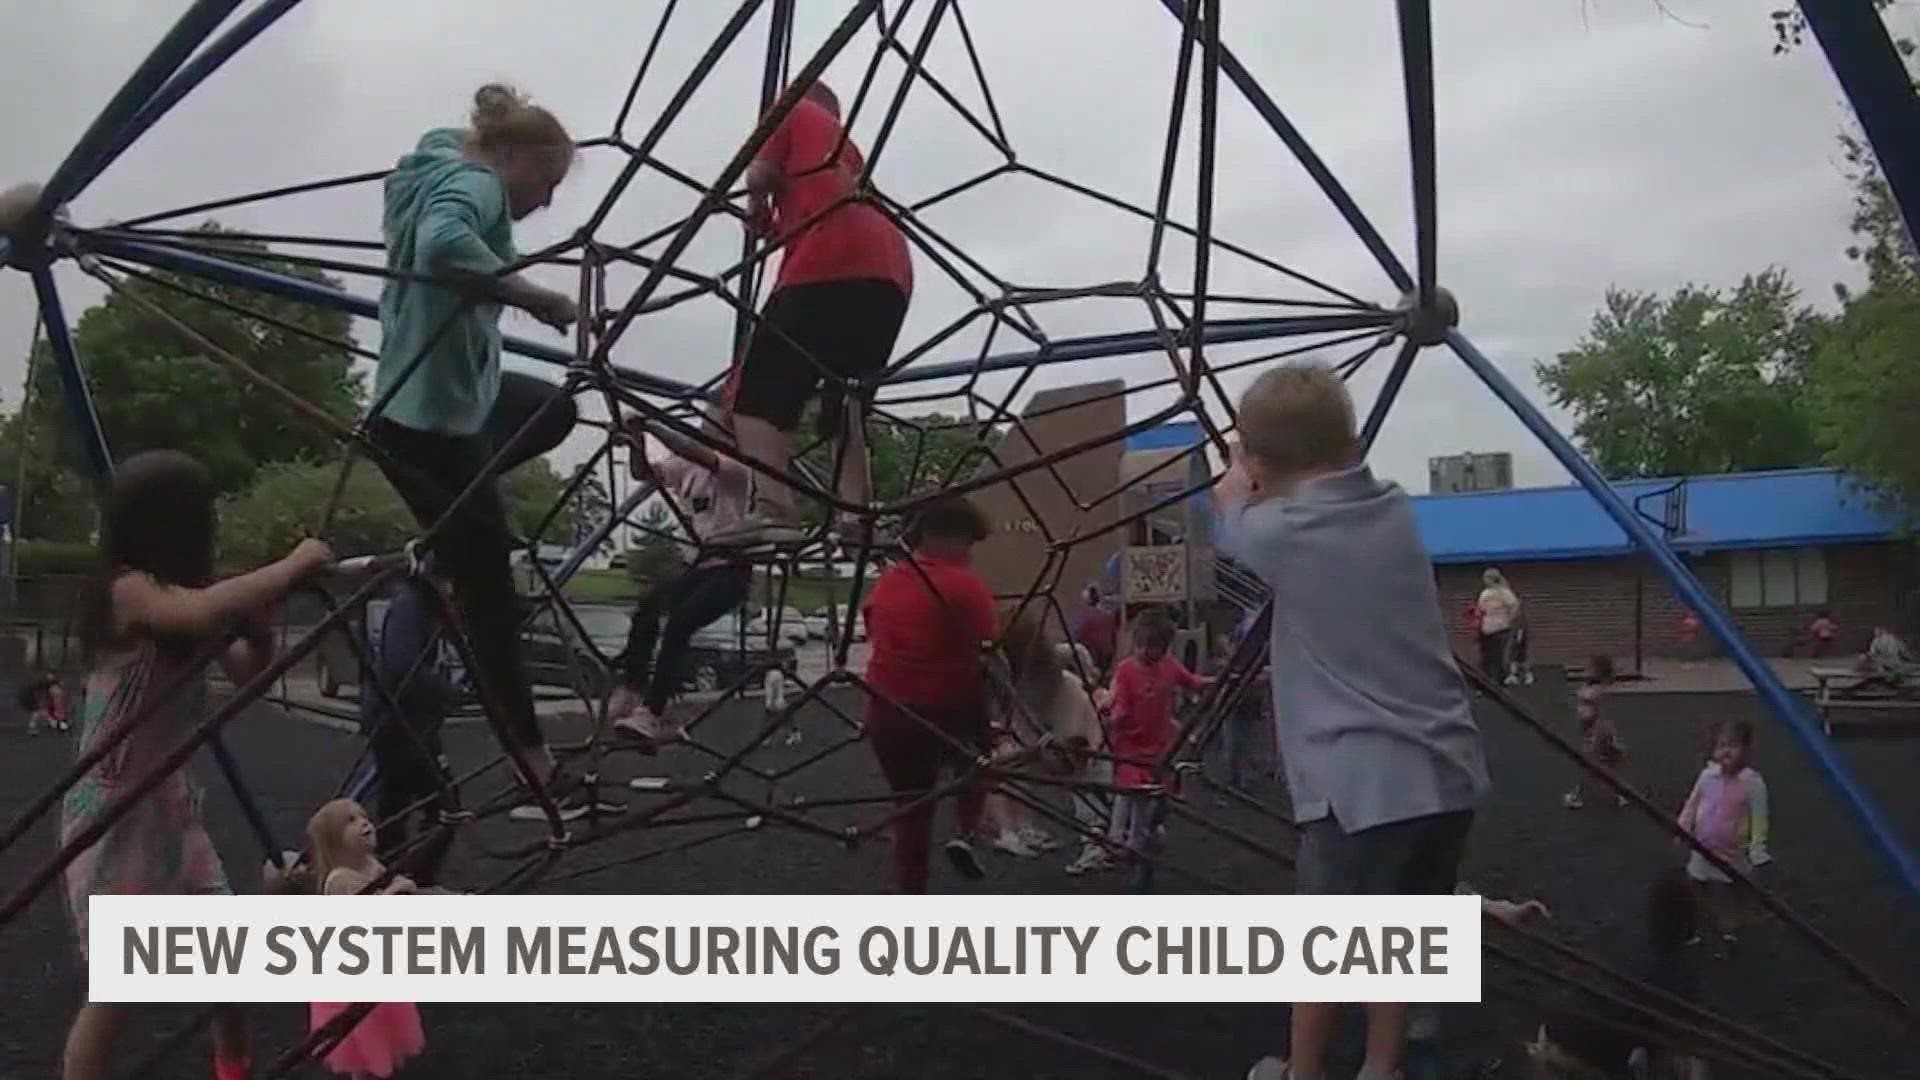 A new program that will help improve the quality of care for childcare centers in Iowa rolled out this month.